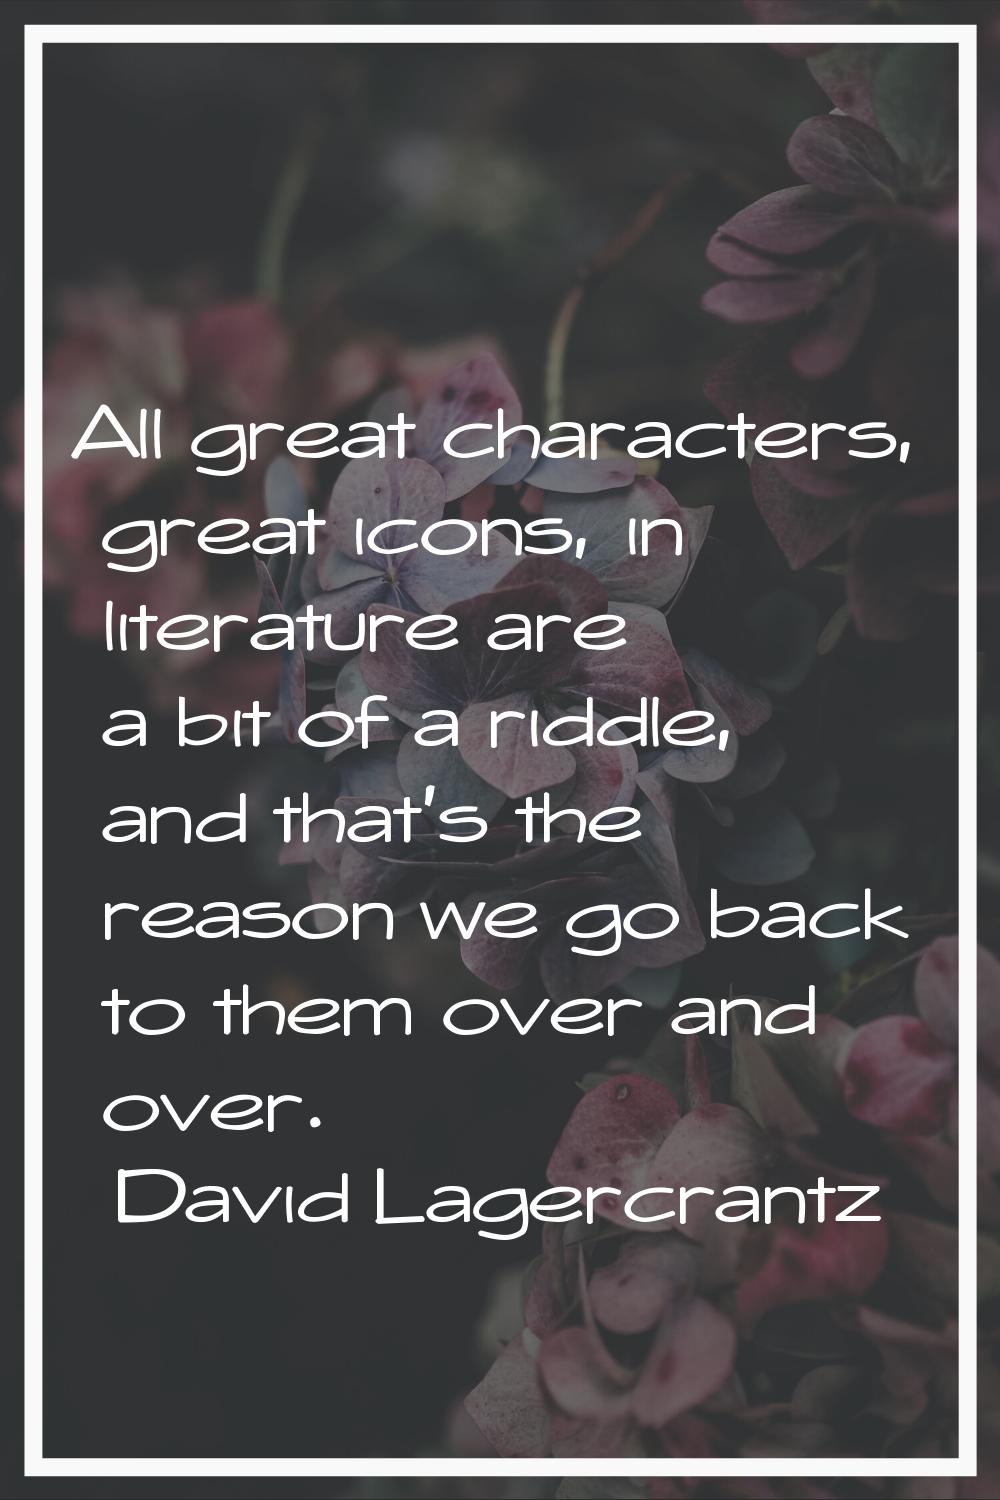 All great characters, great icons, in literature are a bit of a riddle, and that's the reason we go